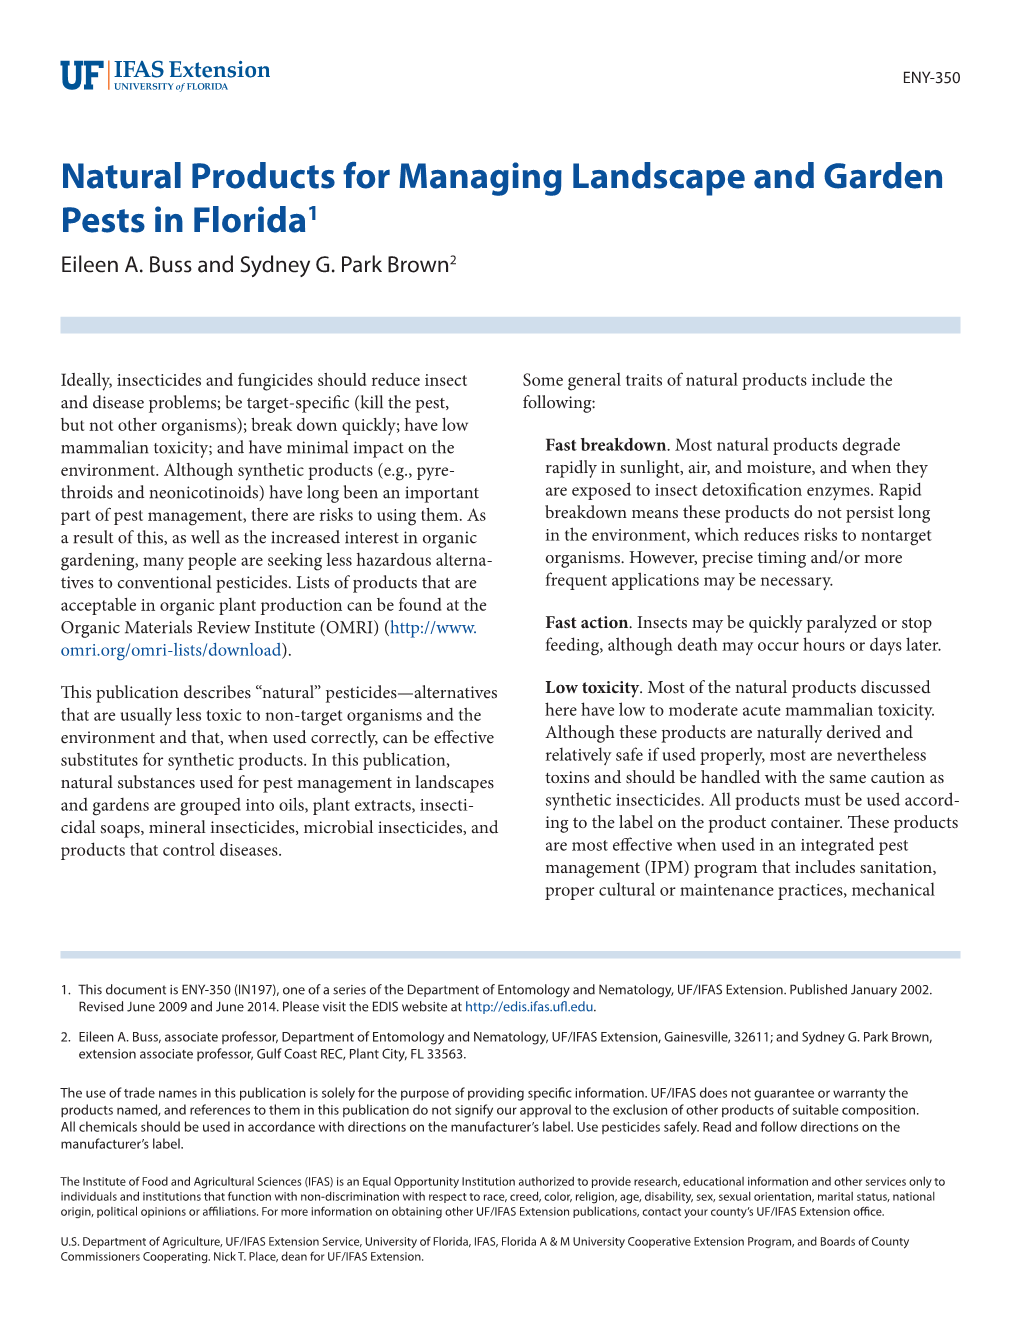 Natural Products for Managing Landscape and Garden Pests in Florida1 Eileen A